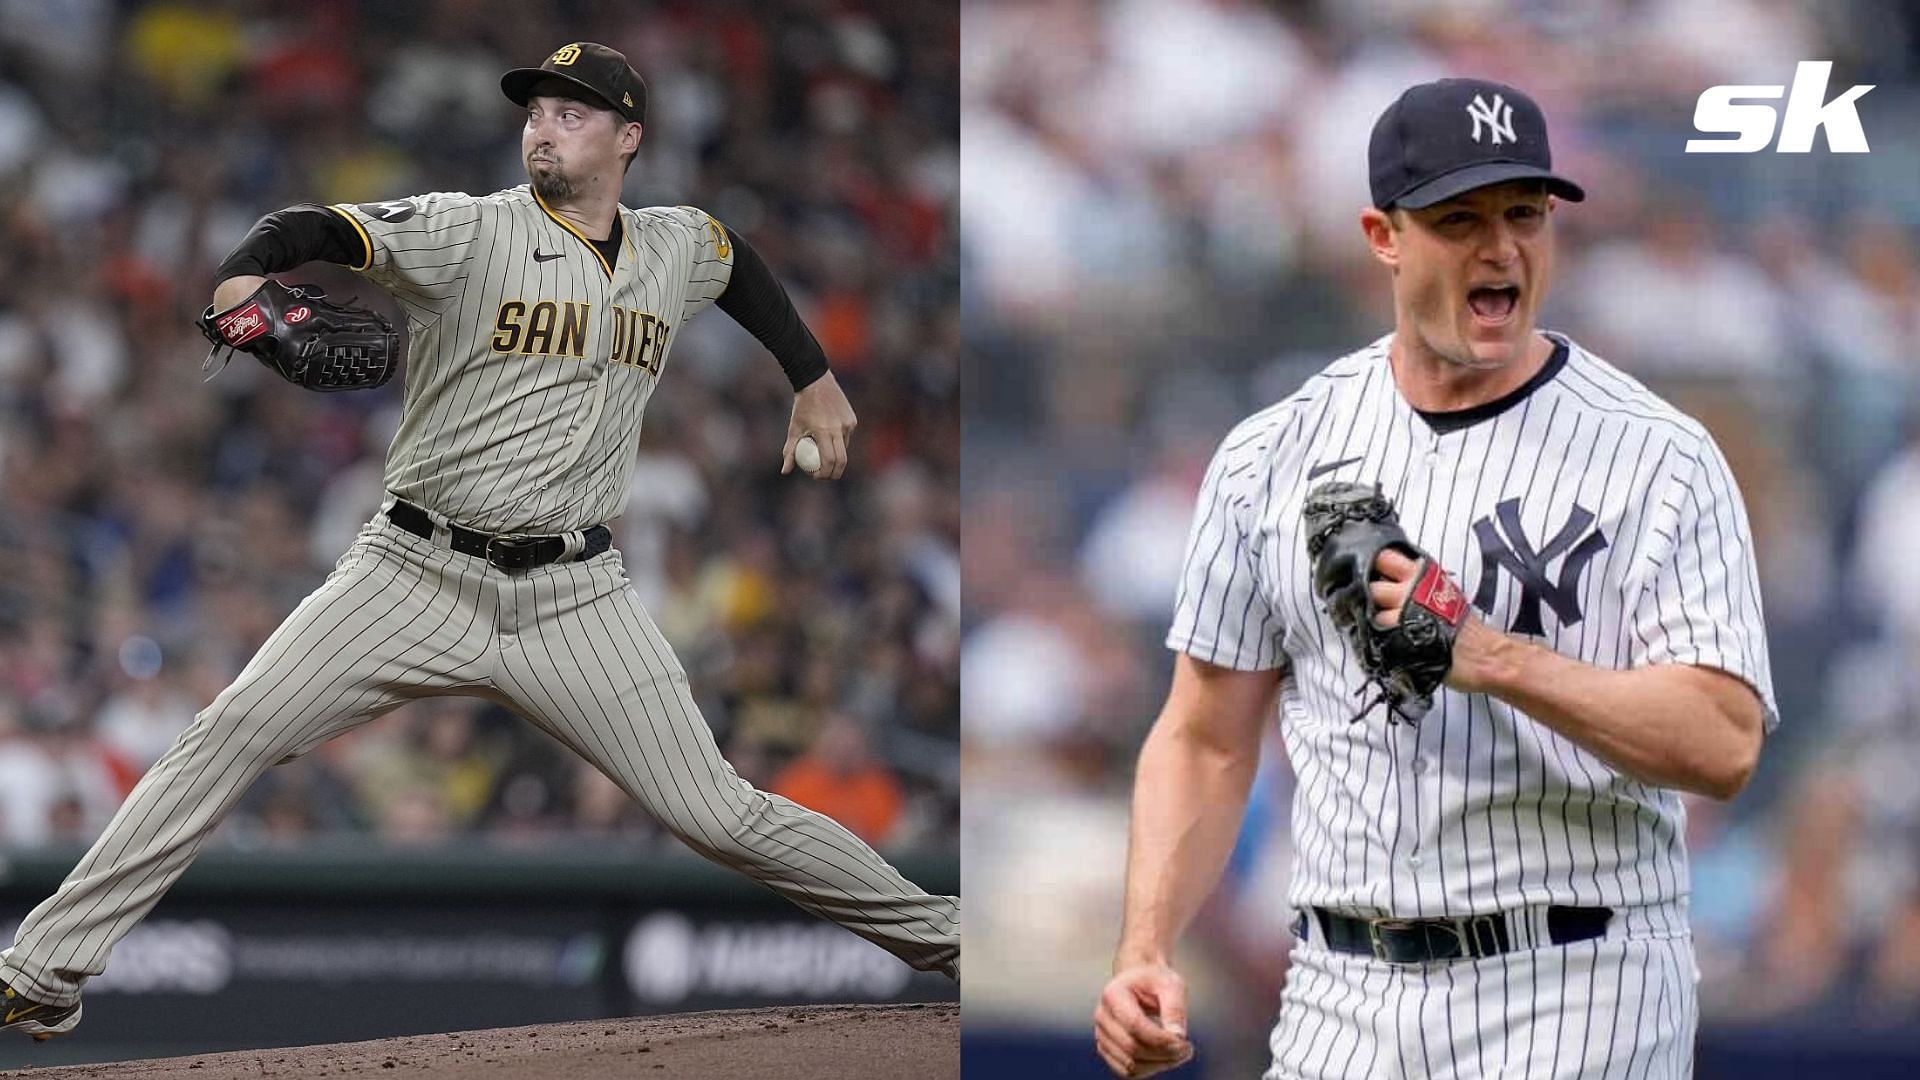 Gerrit Cole and Blake Snell have been named as the 2023 Cy Young Award winners